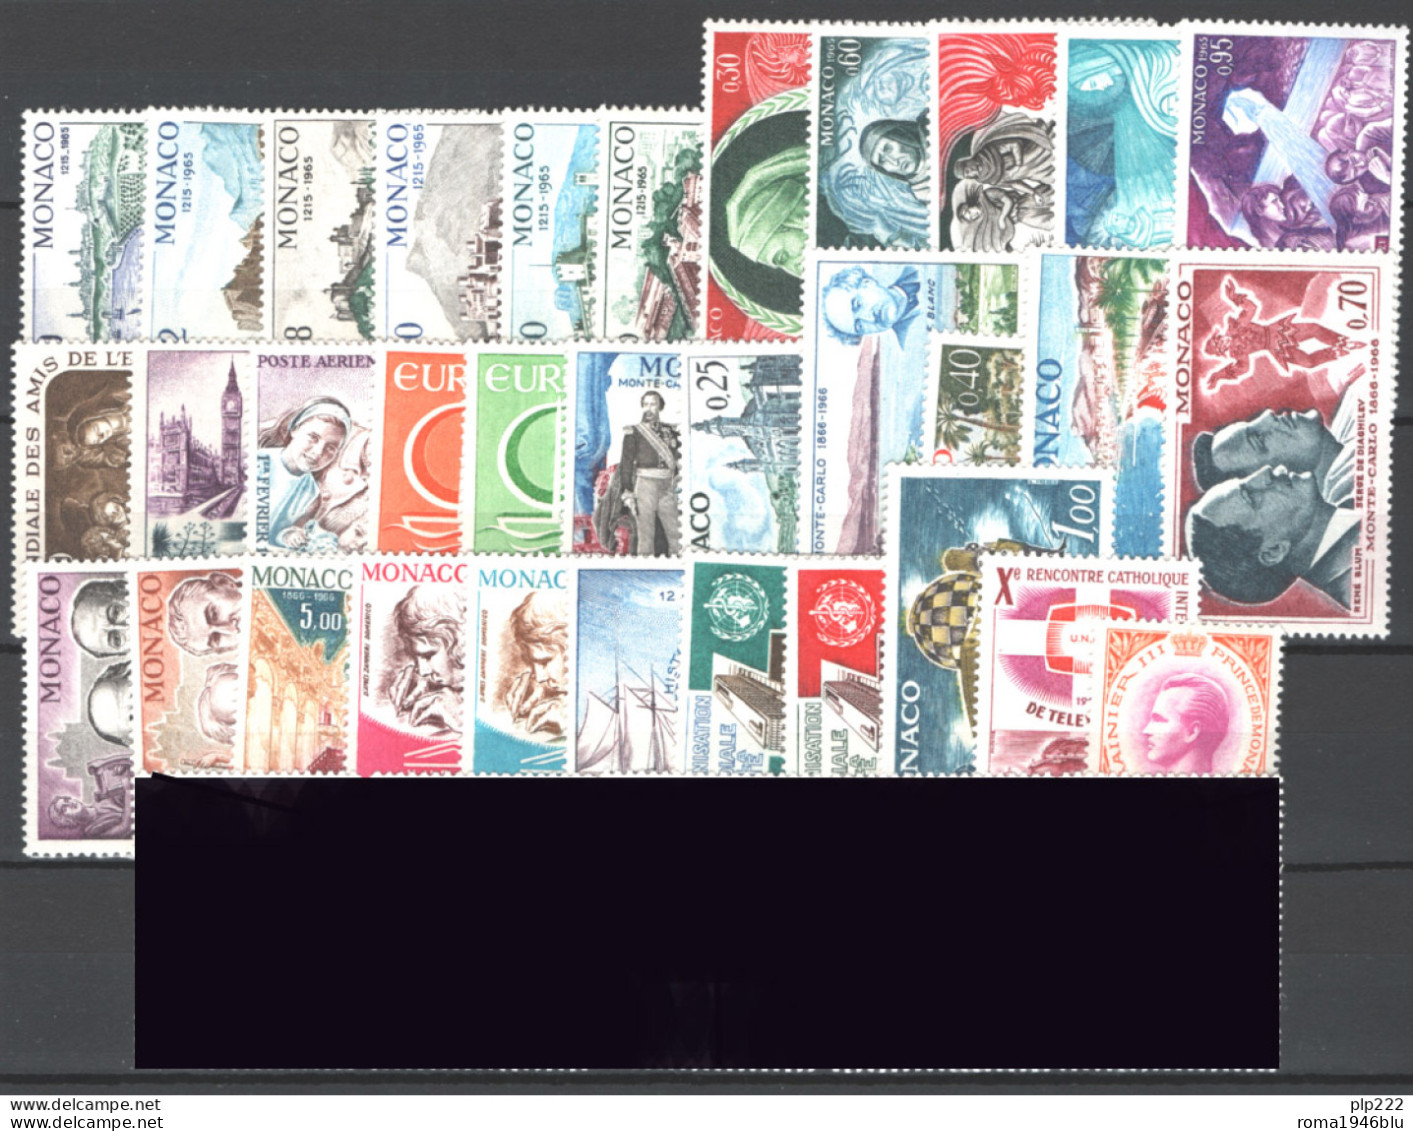 Monaco 1966 Annata Completa Senza Aerea / Complete Year Set Without Air Mail **/MNH VF - Annate Complete